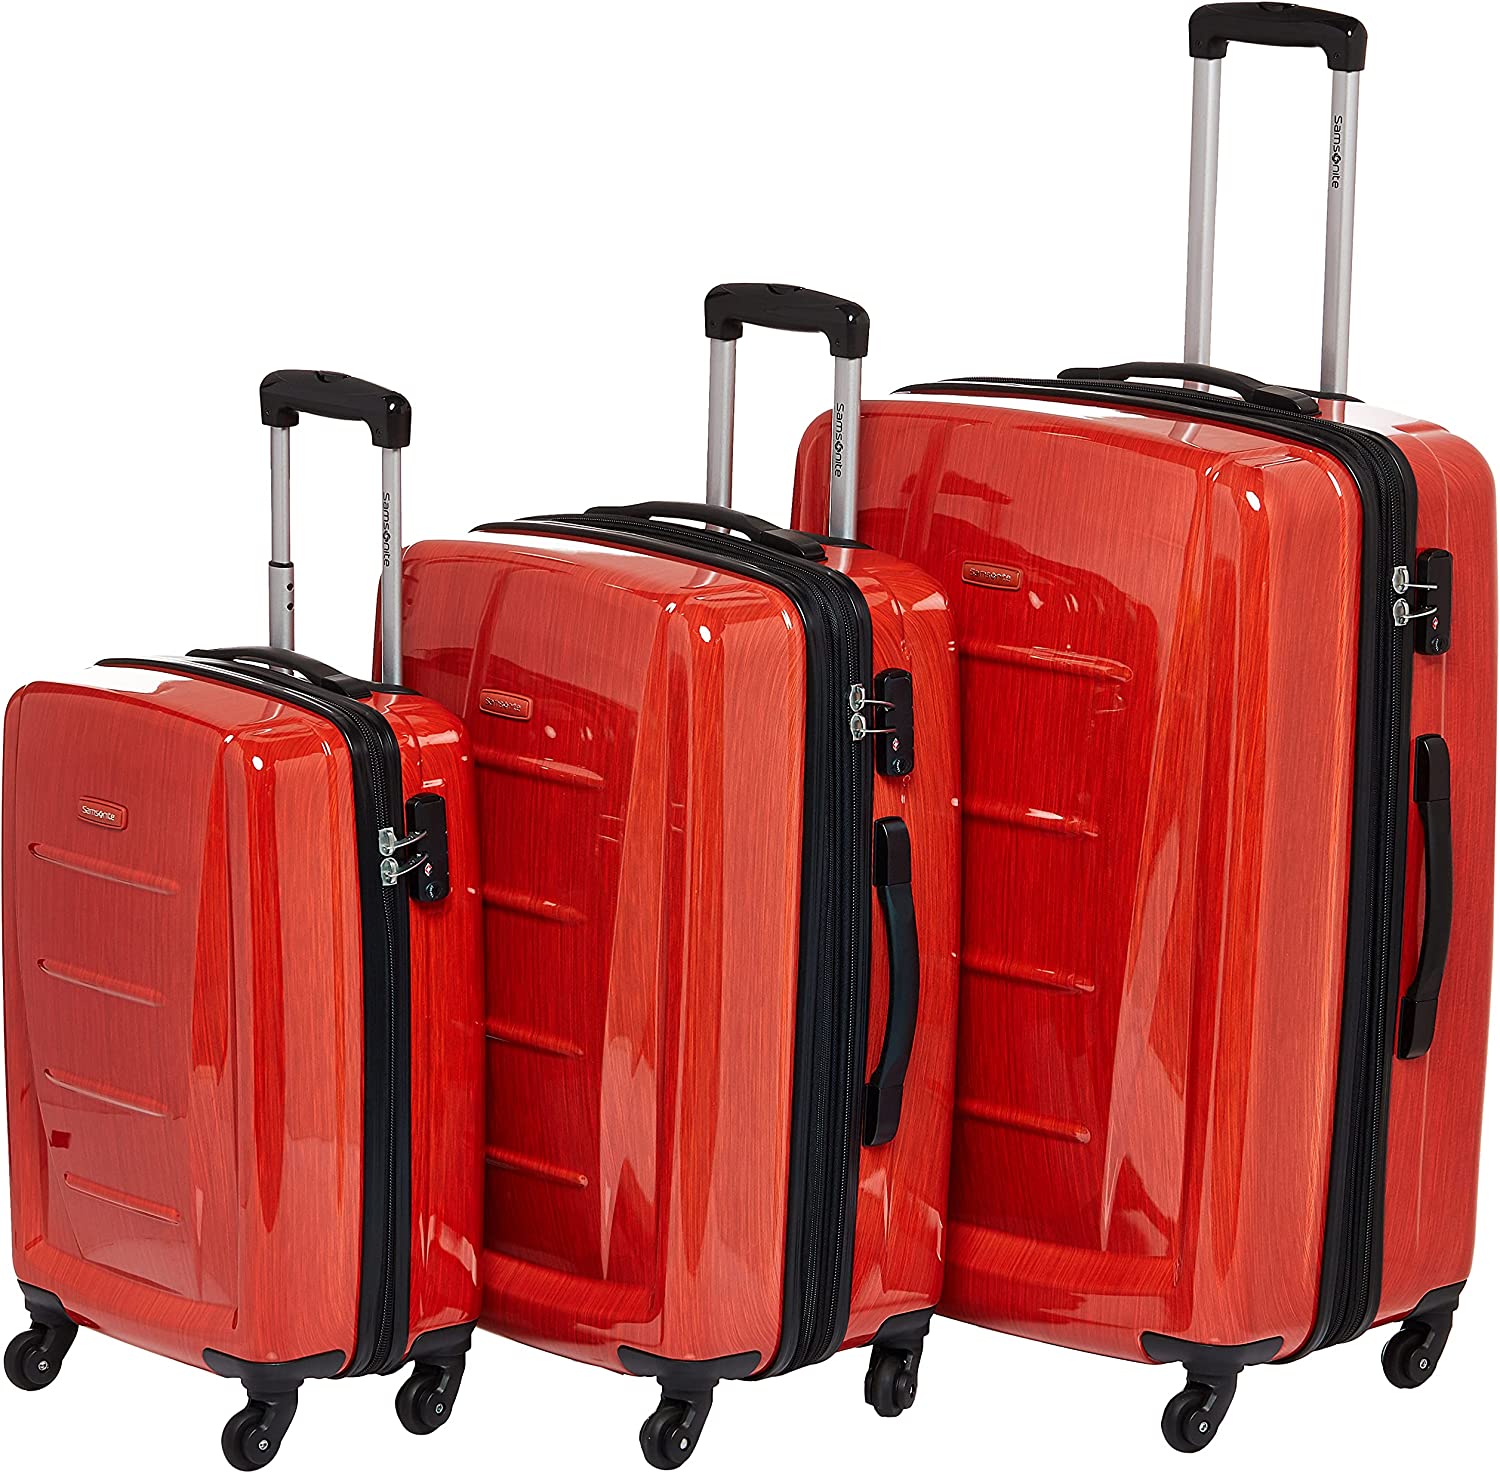 Winfield 3 Hardside Baggage with Spinner Wheels